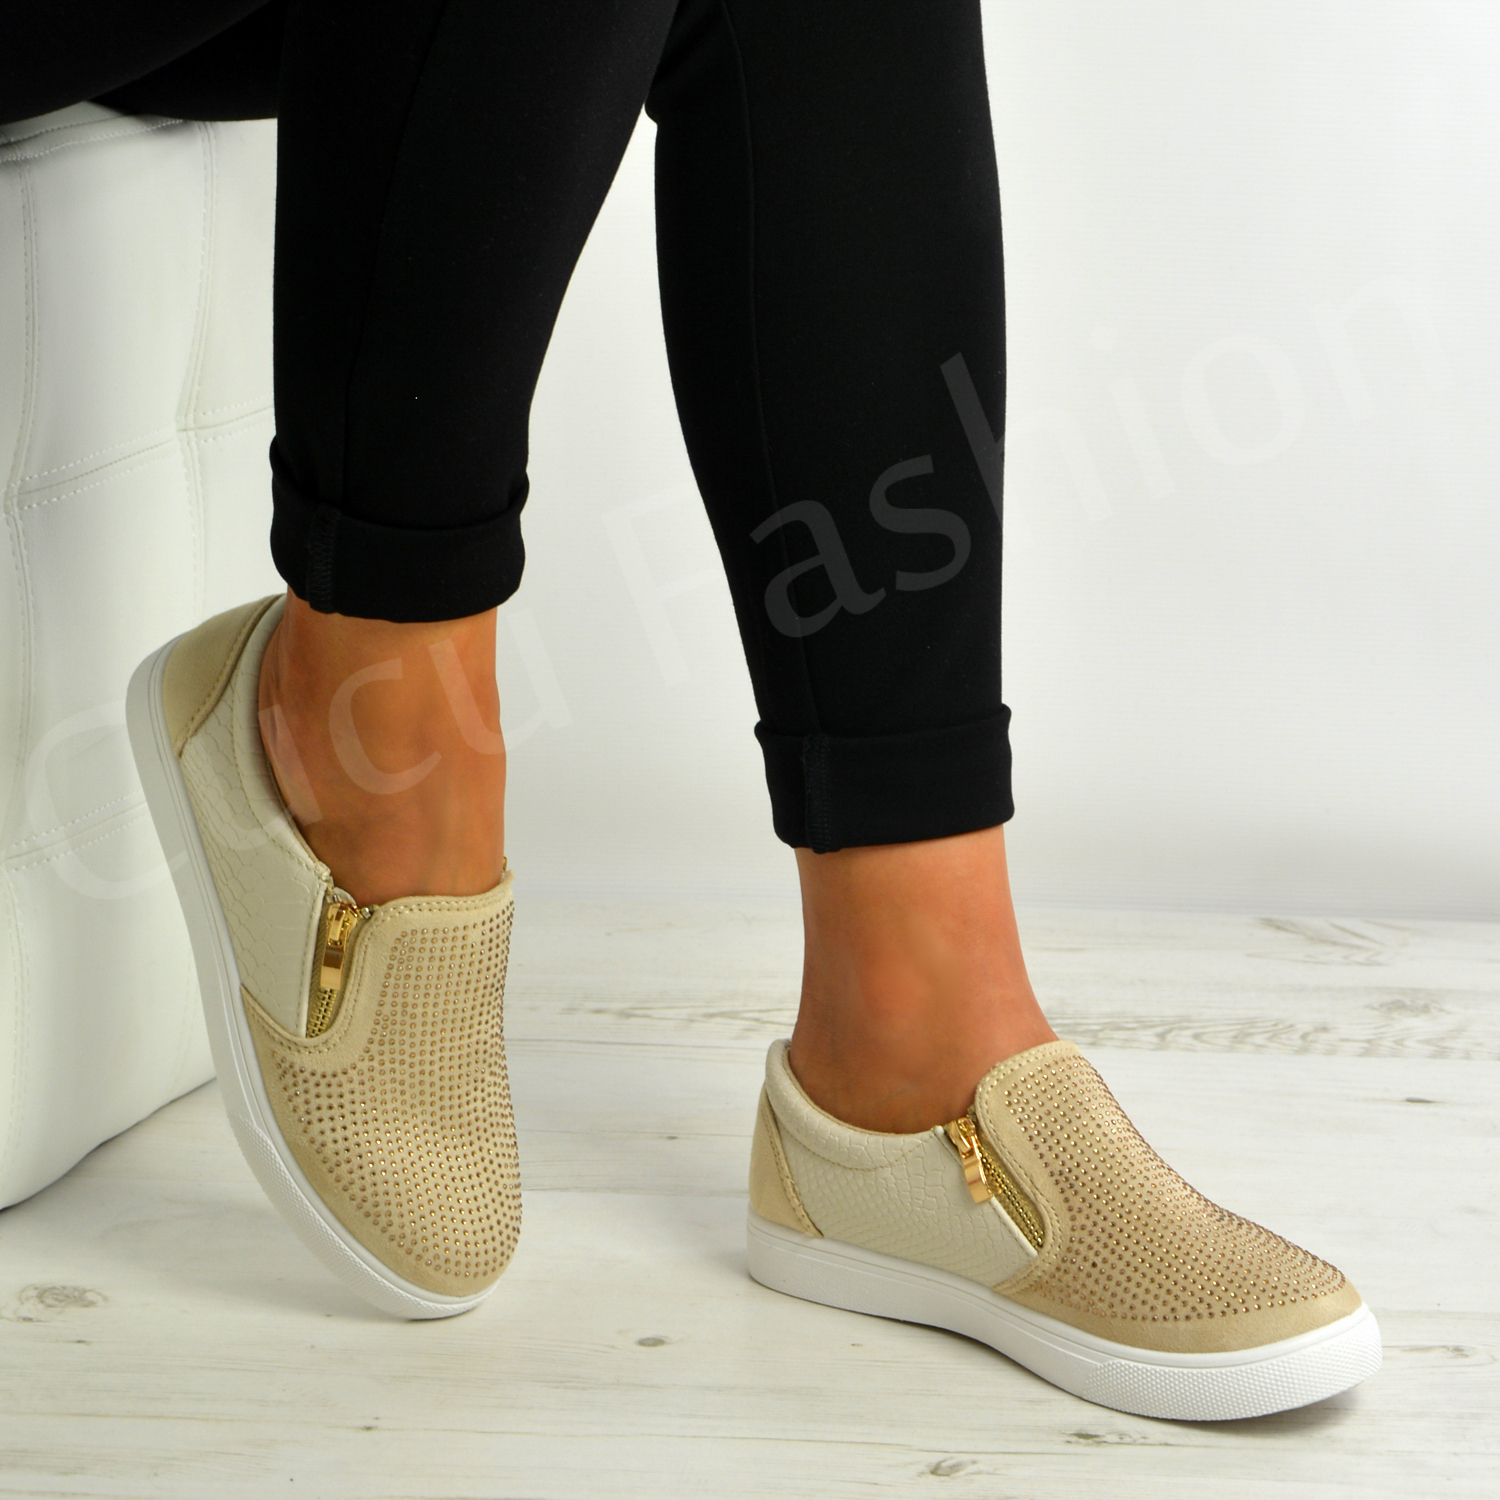 WOMENS LADIES GOLD TRAINERS LACE UP SNEAKERS CASUAL PLIMSOLLS SHOES SIZES 3-8 